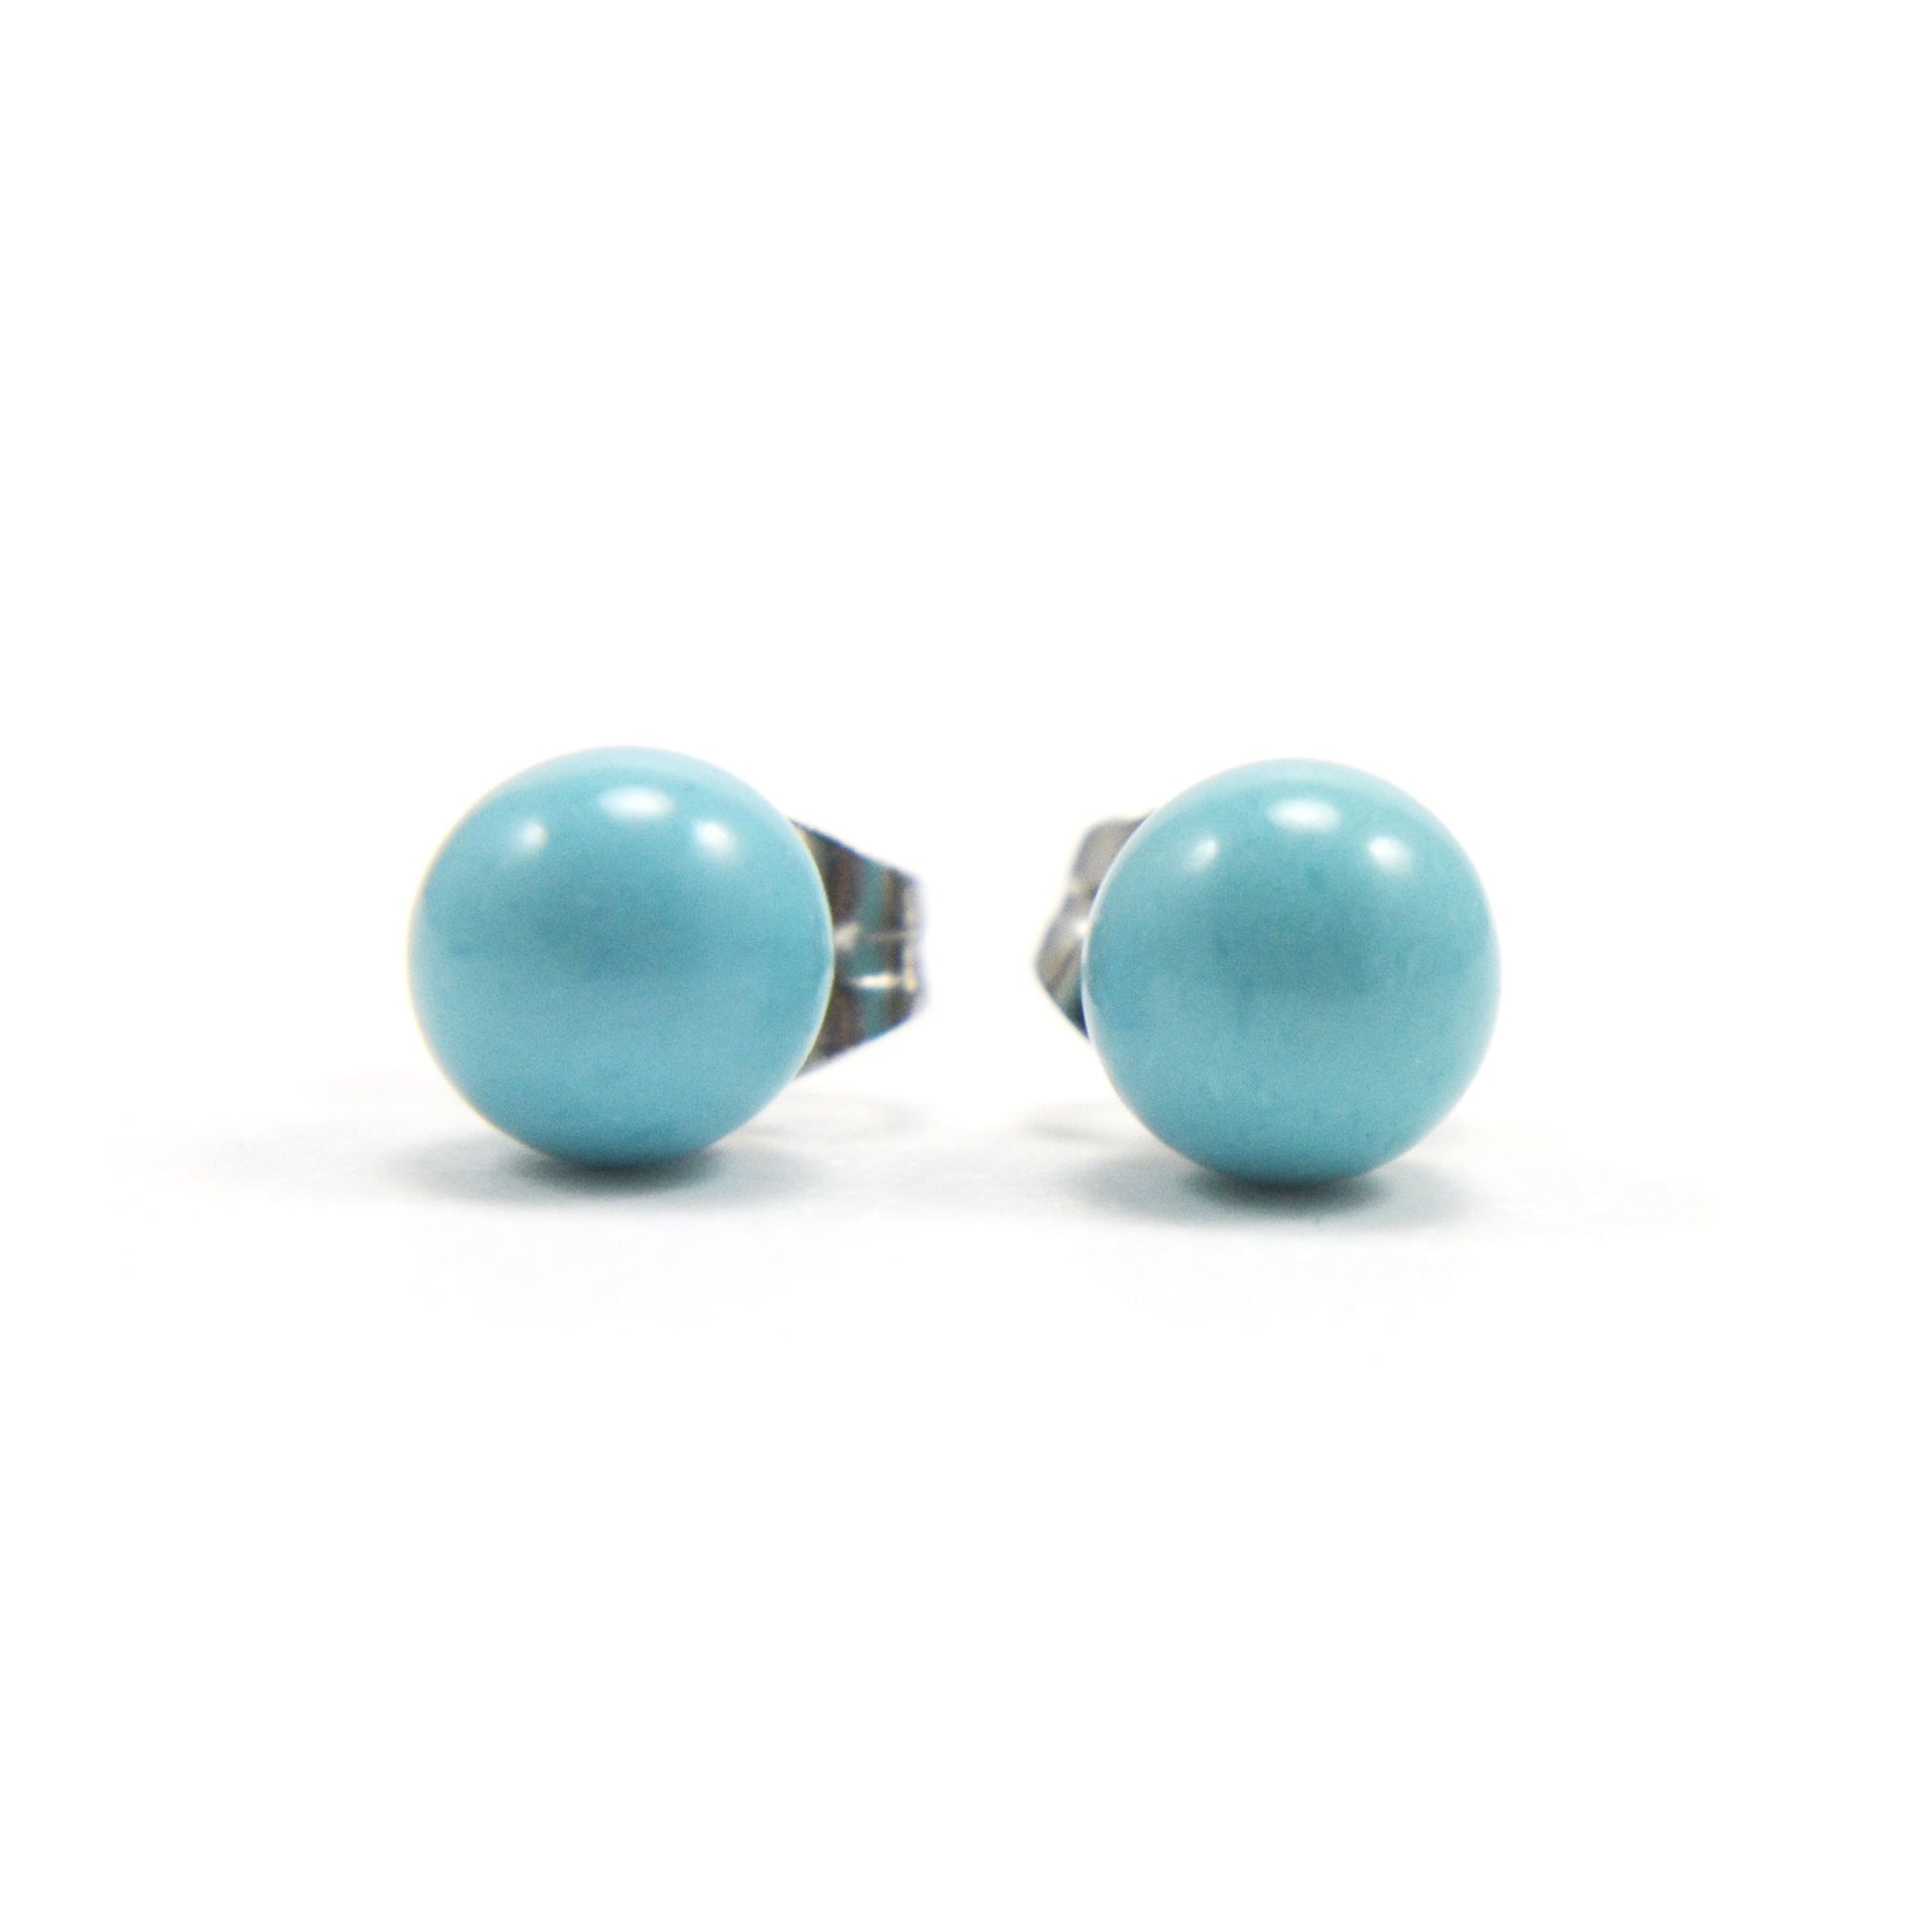 Front view of Turquoise ball stud earrings on white background